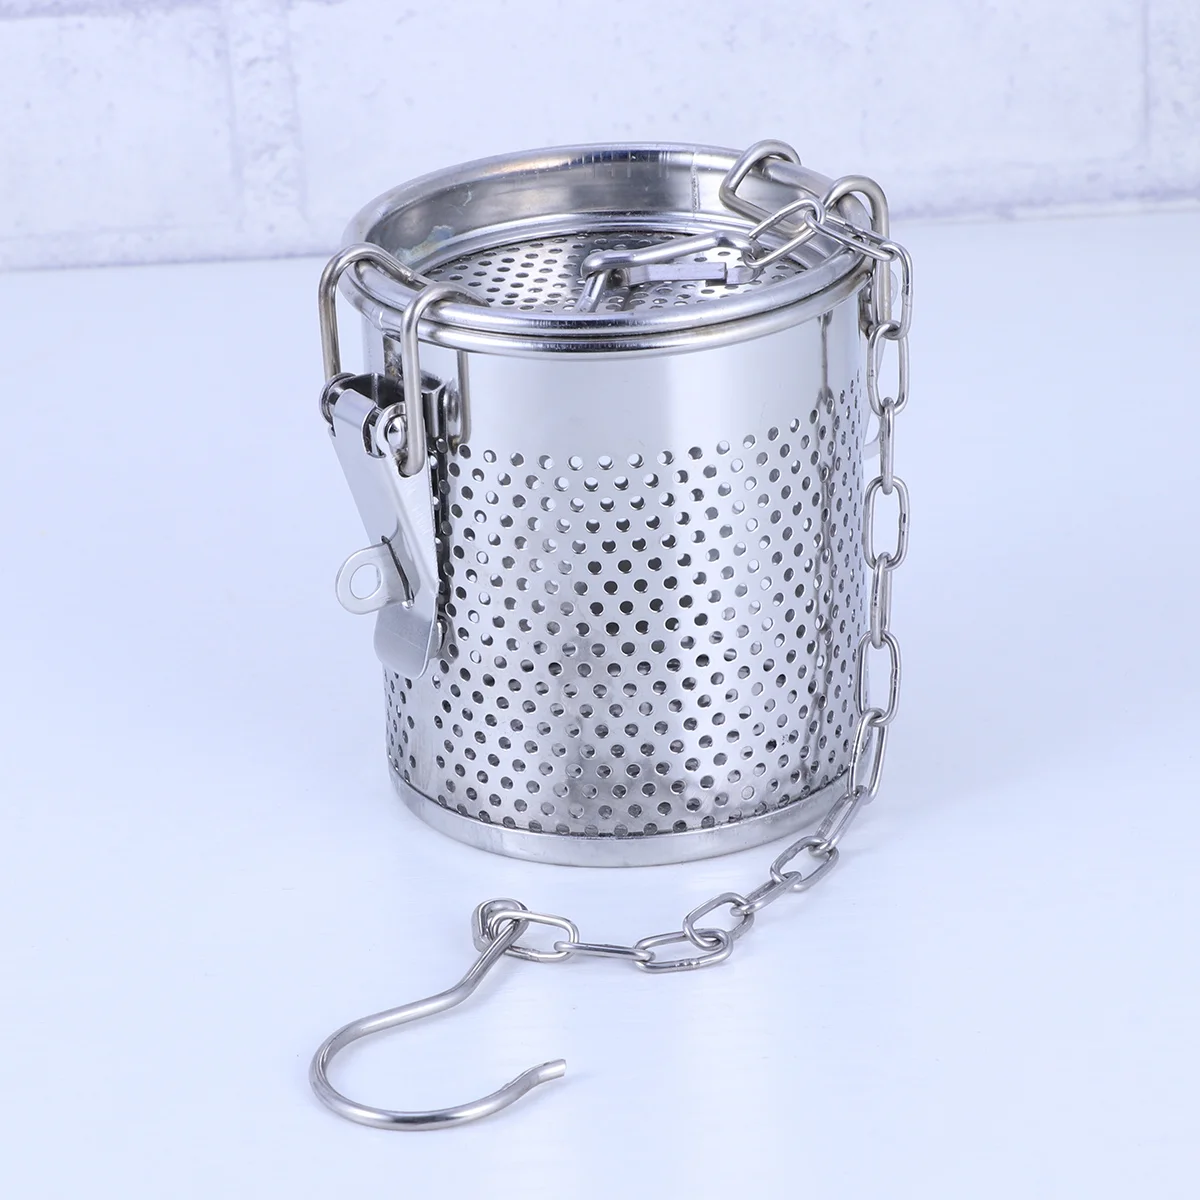 

Fine Mesh Soup Ball Strainer Spice Balls Cooking Infuser Stainless Steel Kimchi Seasoning